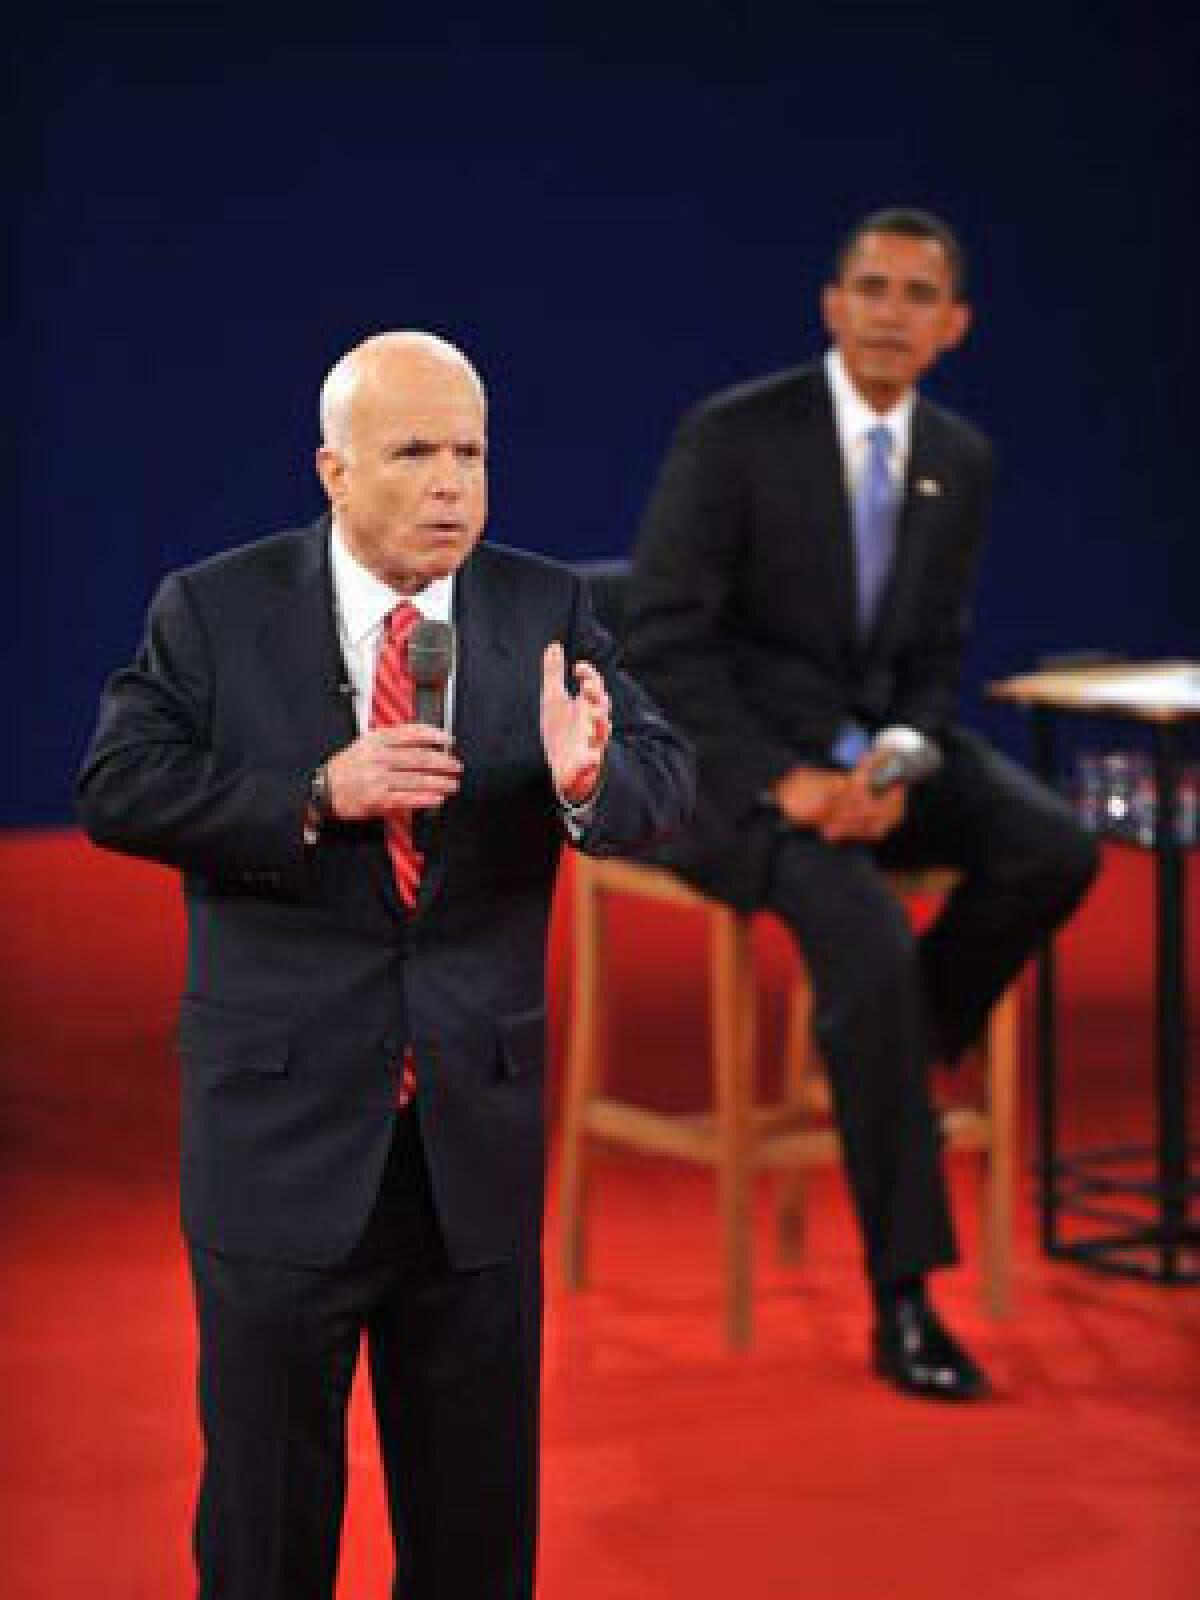 RED STATE: John McCain upped his style score Tuesday with the his dark suit.